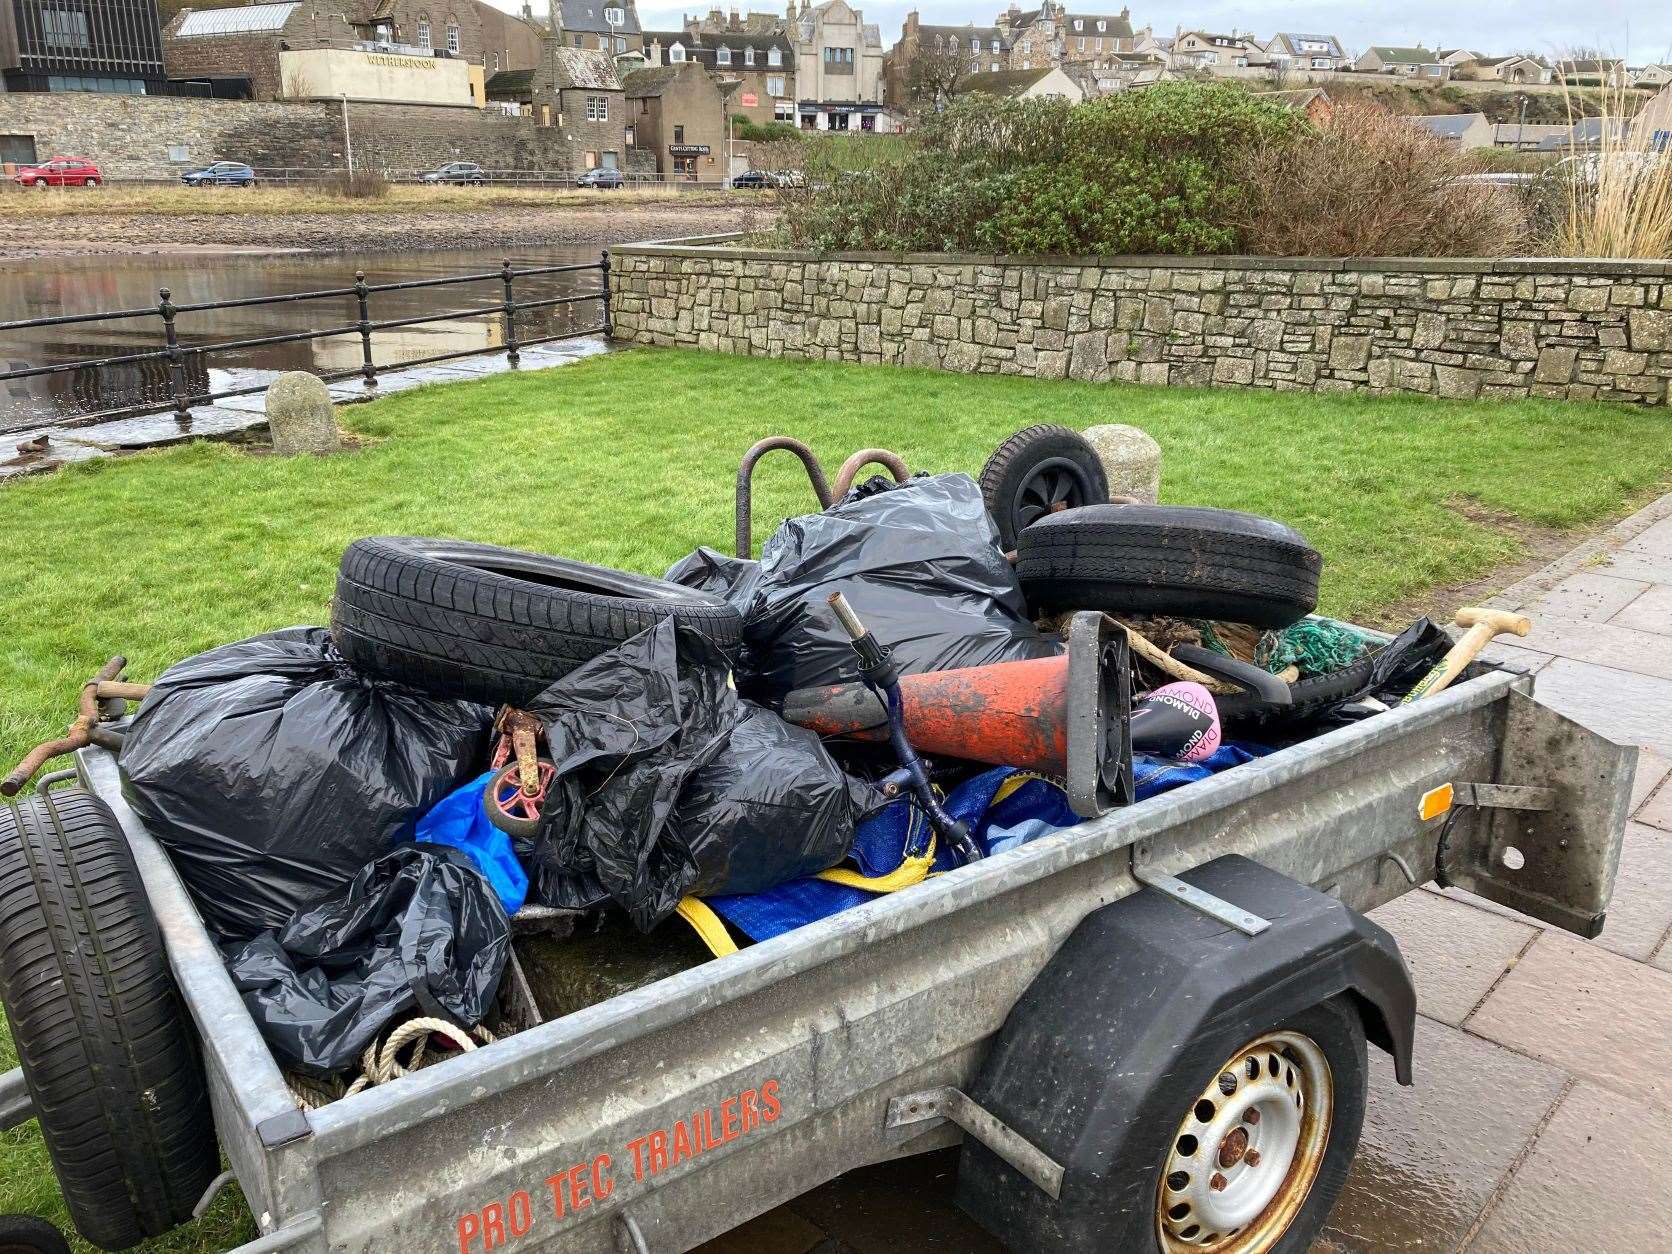 A trailer-load of rubbish gathered from the shore at Market Street and along the riverside on Sunday.